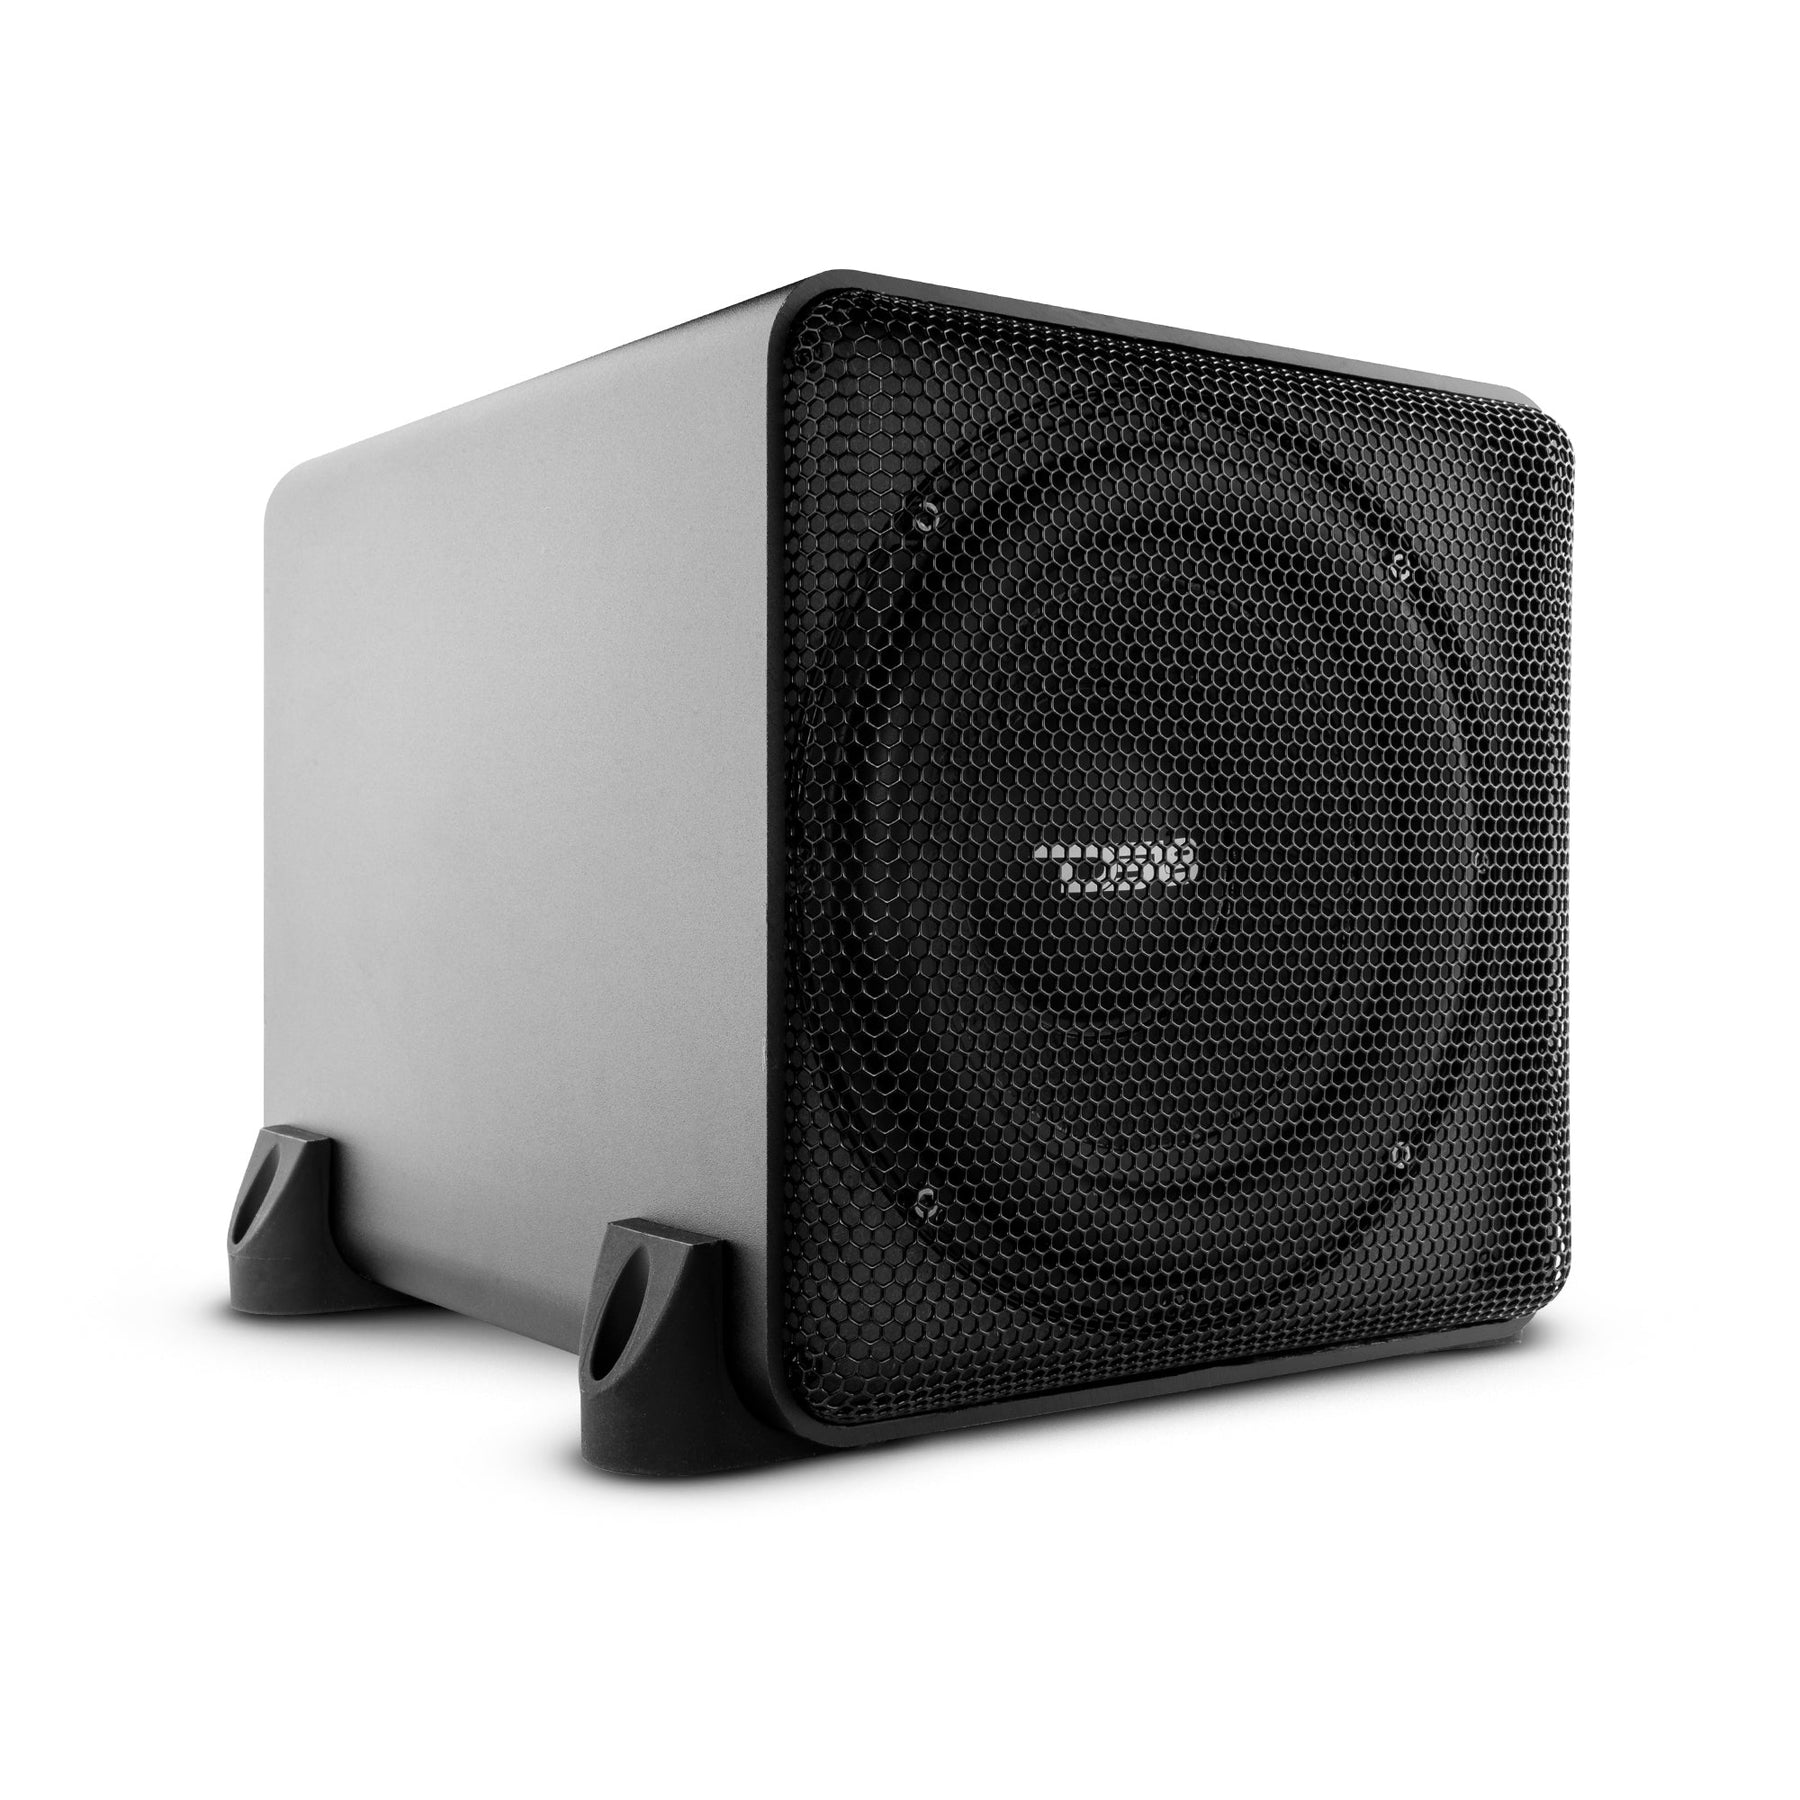 Top 8 Inch Subwoofers for Small Enclosures